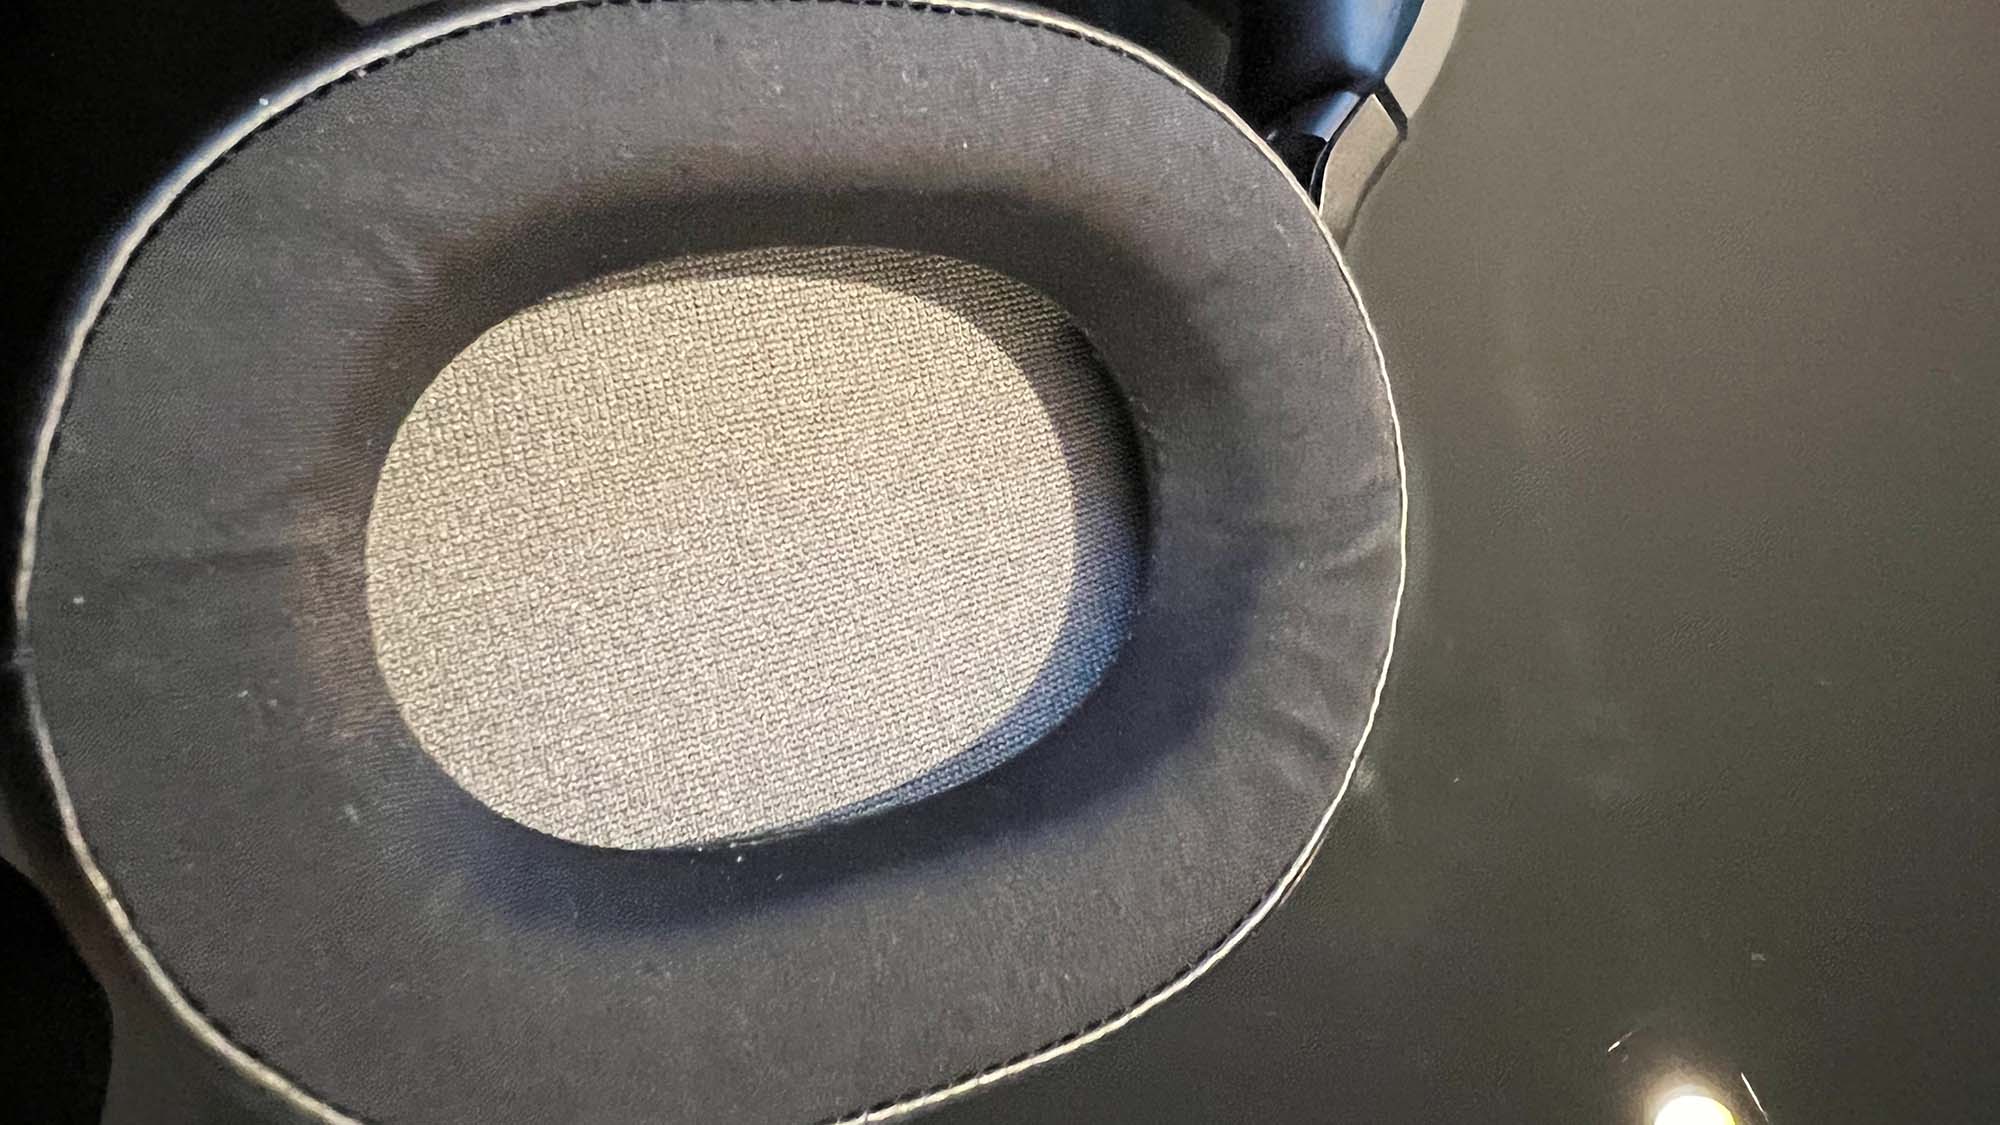 A close up of the earcup of the Corsair HS65 Surround